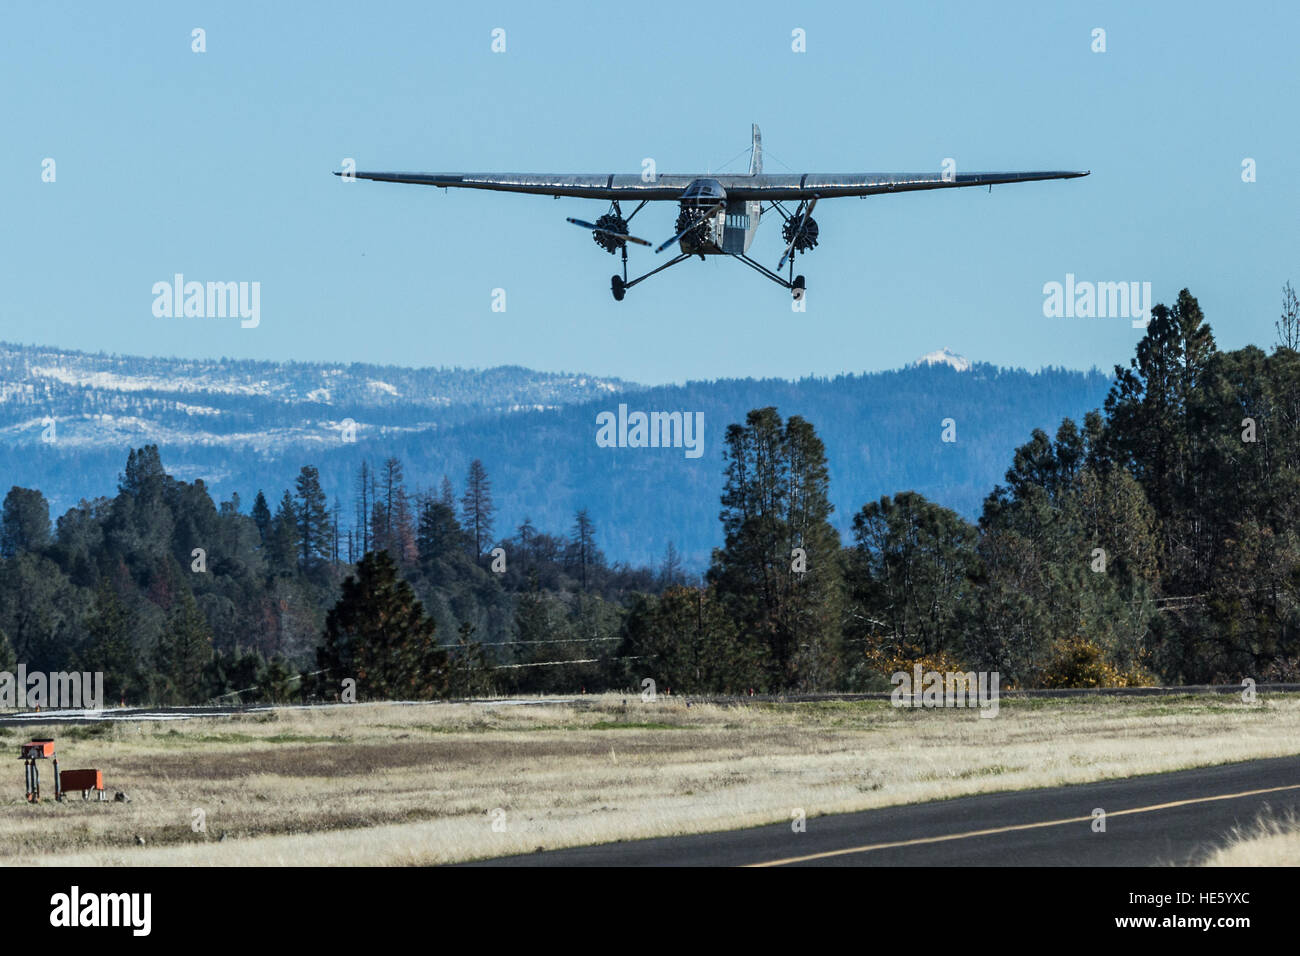 Groveland, California, USA. 17th Dec, 2016. Saturday, December 17, 2016.A 1928 Ford Tri-Motor airplane lands at the Pine Mountain Lake Airport in Groveland, California. This Ford Tri-Motor NC9645, nicknamed The Tin Goose, has a wingspan of 77 feet 6 inches and was constructed in 1928. It was named the City of Wichita, and it was used to introduce the first coast-to-coast passenger air/rail service in the United States on July 7, 1929, and the development and inauguration of the first all air passenger service on October 25, 1930. The plane can carry up to 10 passengers.Experimental Ai Stock Photo